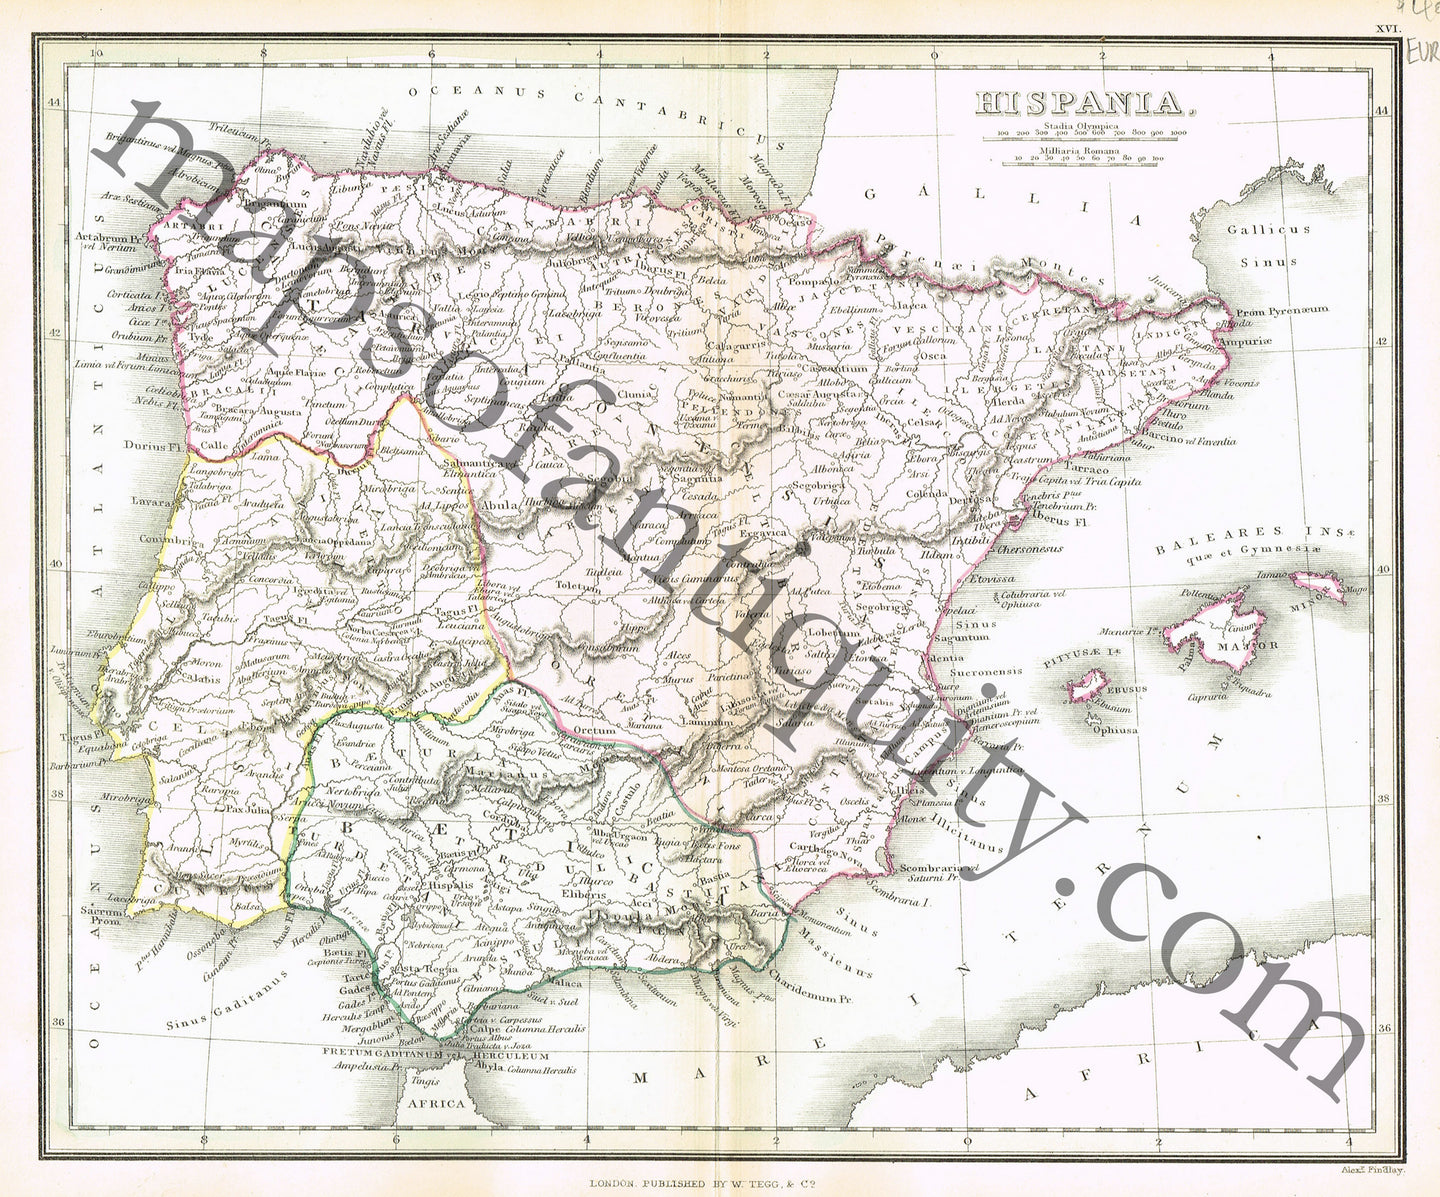 Antique-Hand-Colored-Map-Hispania-Europe-Ancient-World-Spain-&-Portugal-1840-Findlay-Maps-Of-Antiquity